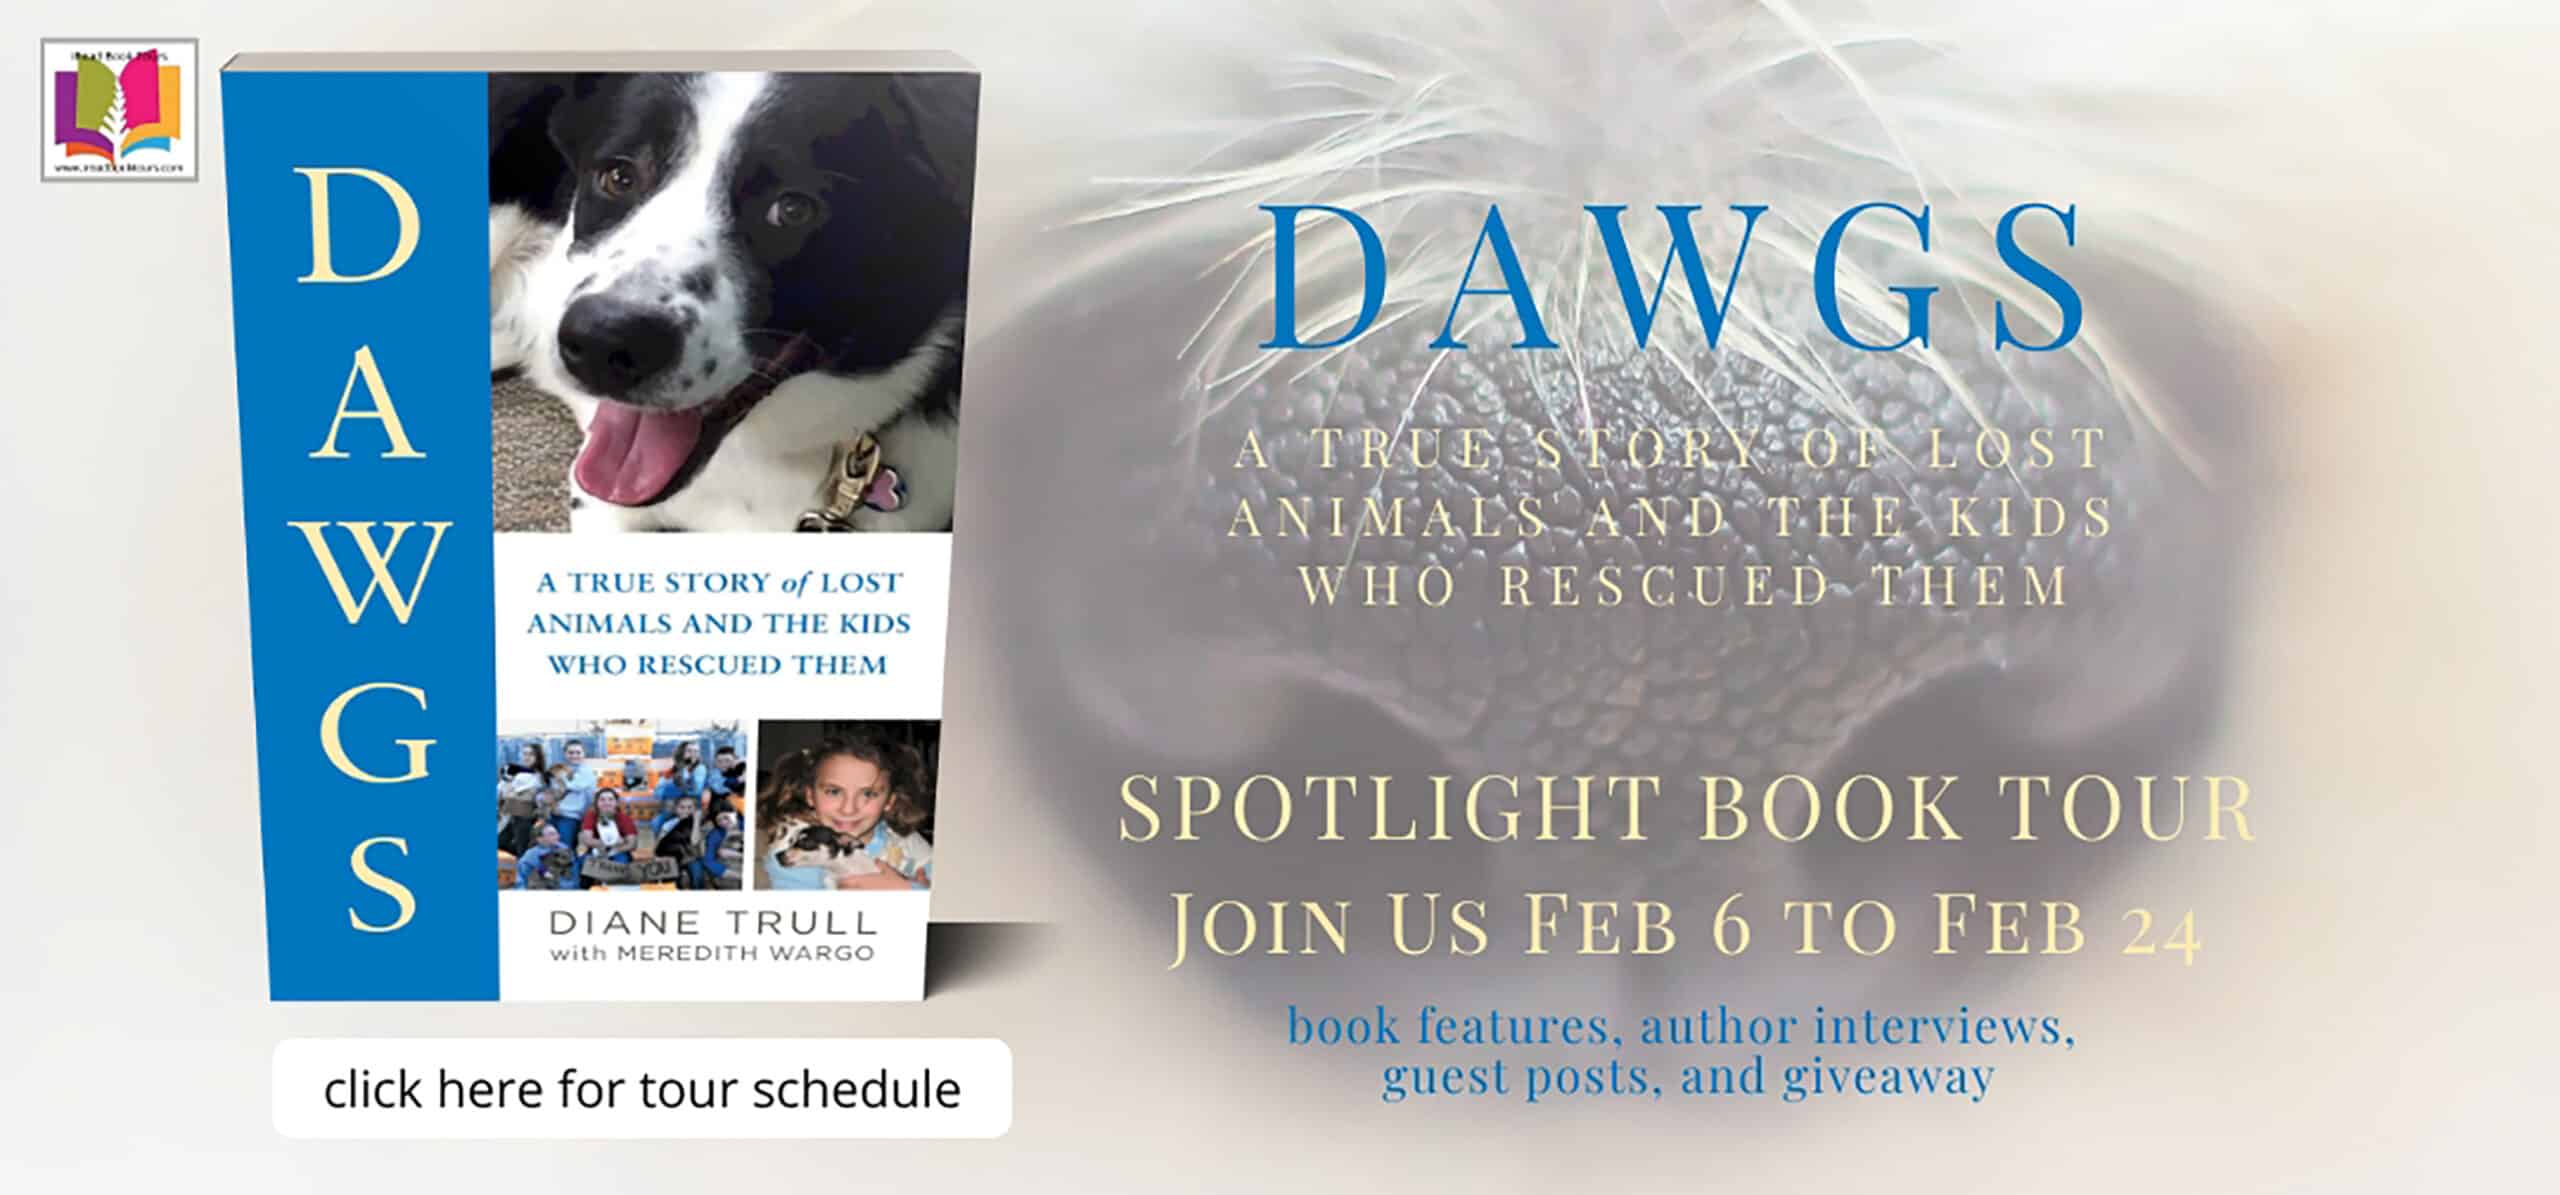 DAWGS: A True Story of Lost Animals and the Kids Who Rescued Them by Diane Trull with Meredith Wargo | Spotlight ~ Author Guest Post ~ Signed Copy Raffle (ends 3/3/23)